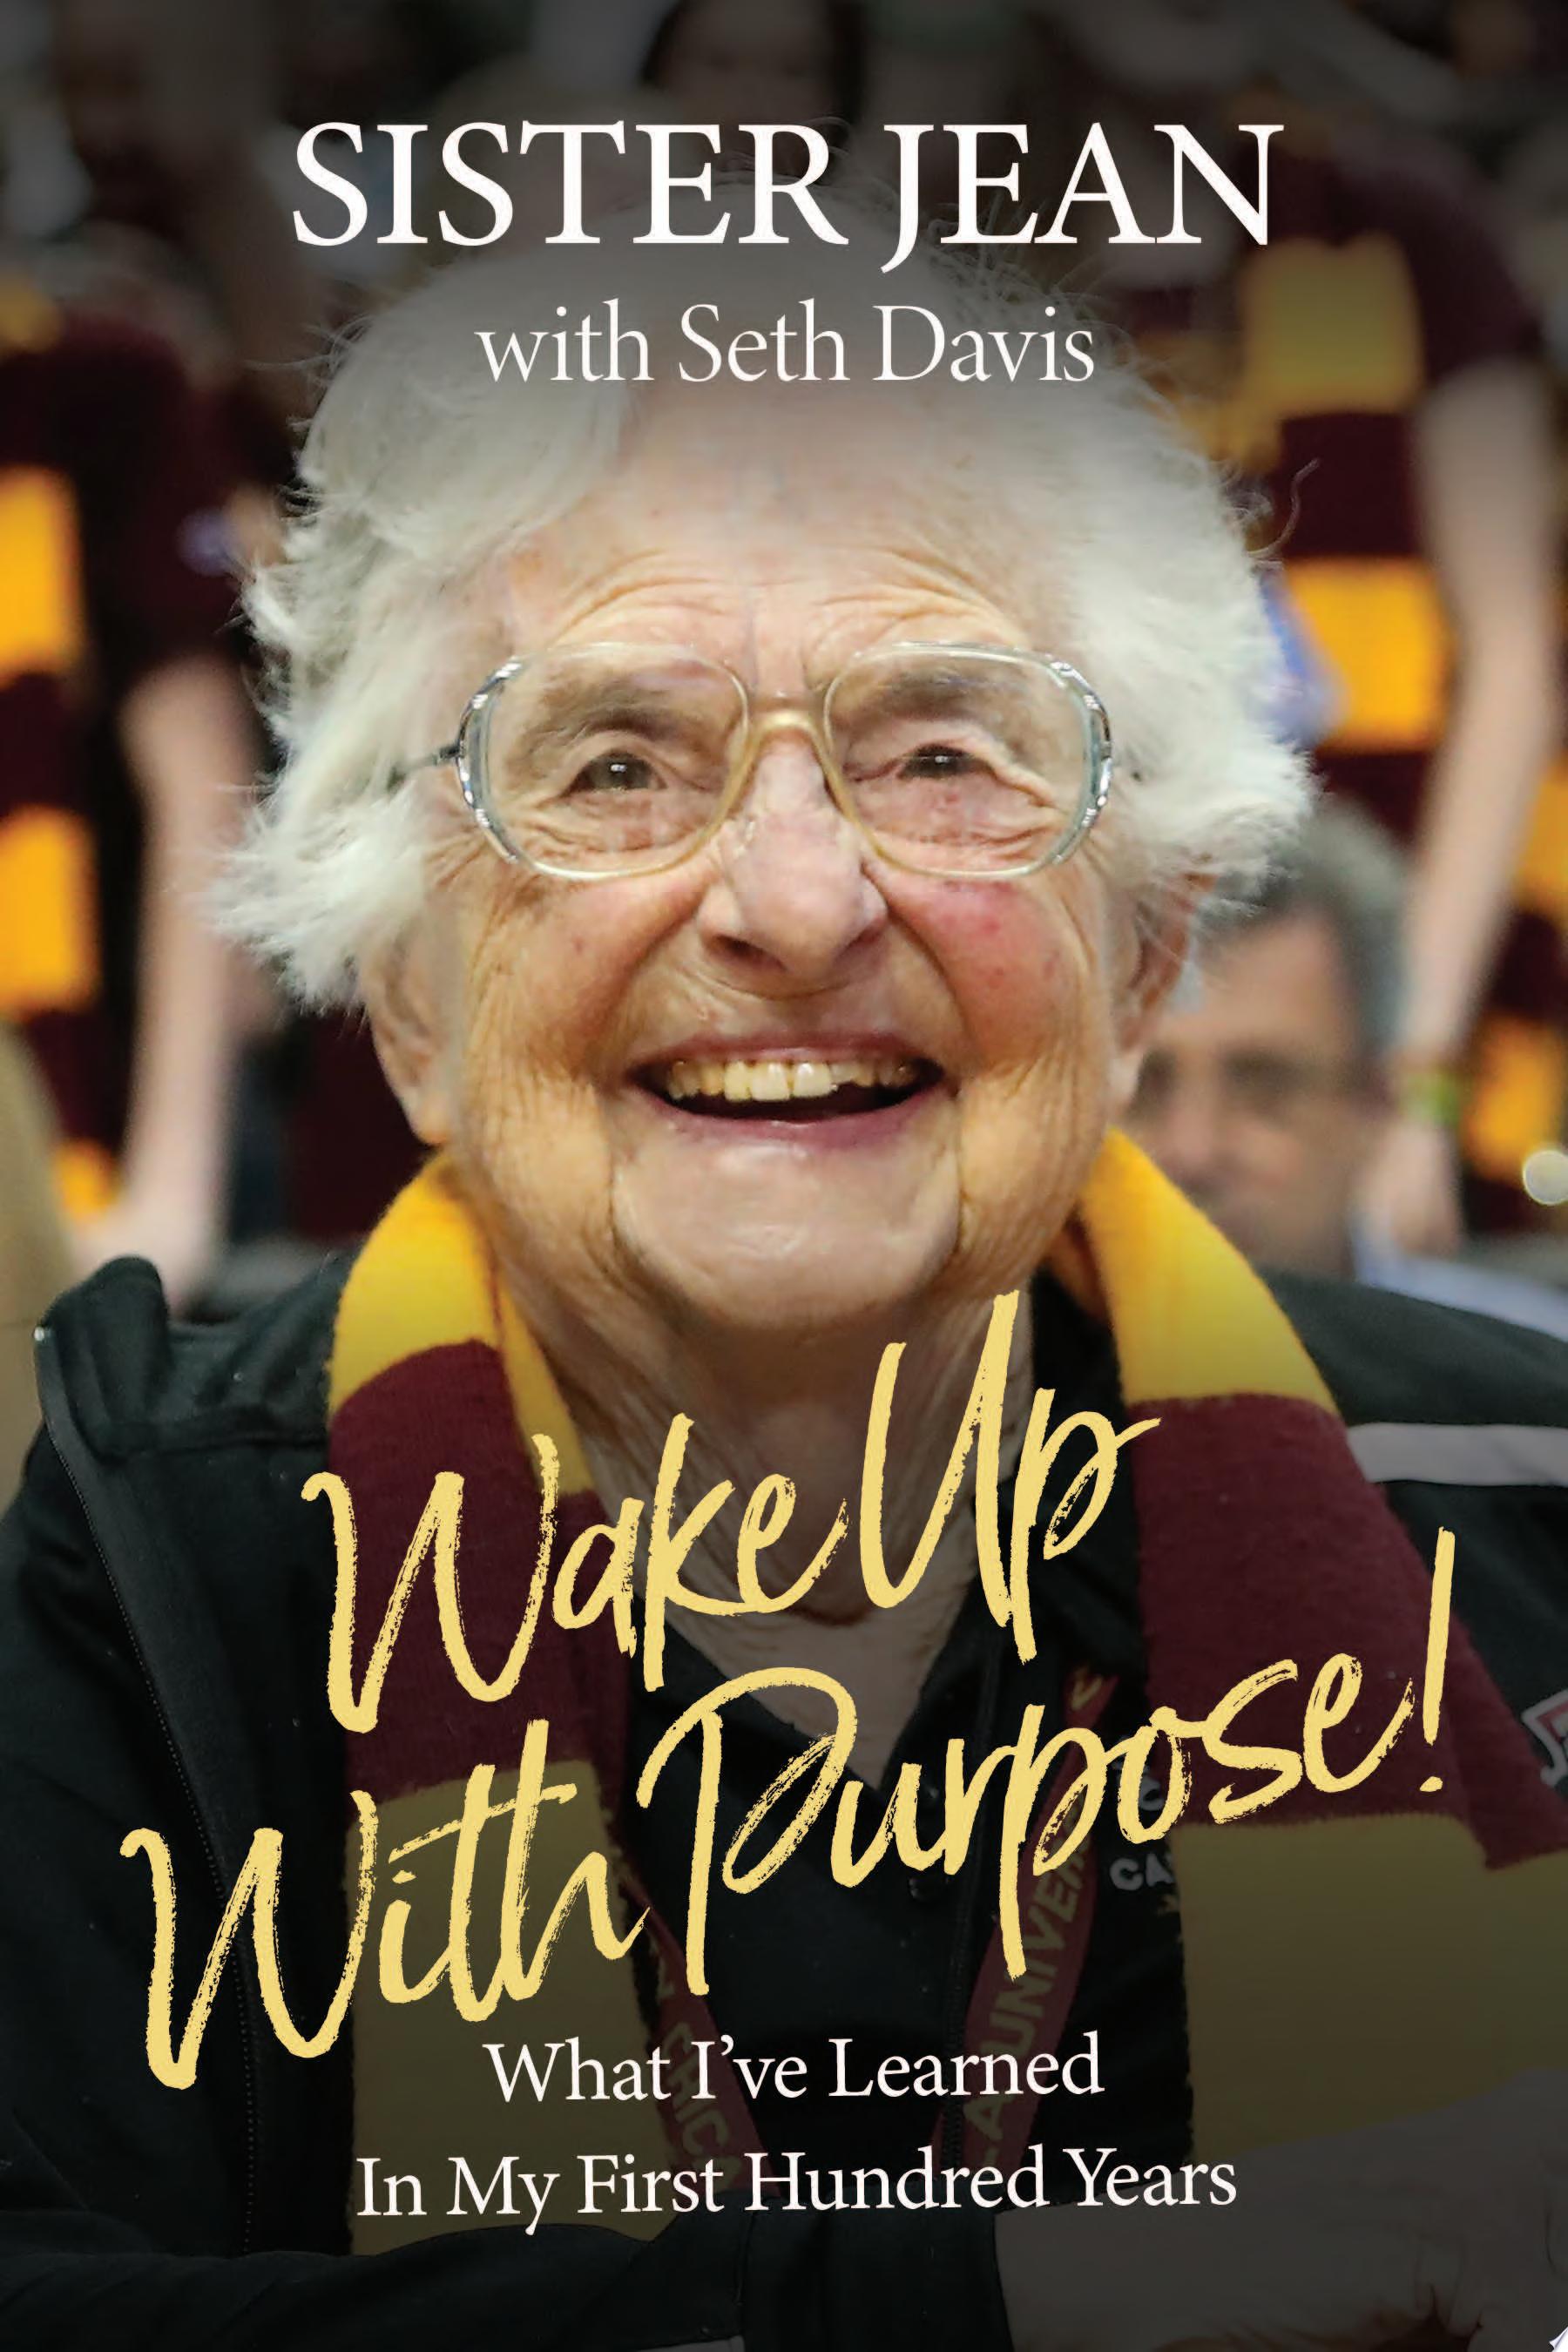 Image for "Wake Up With Purpose!"